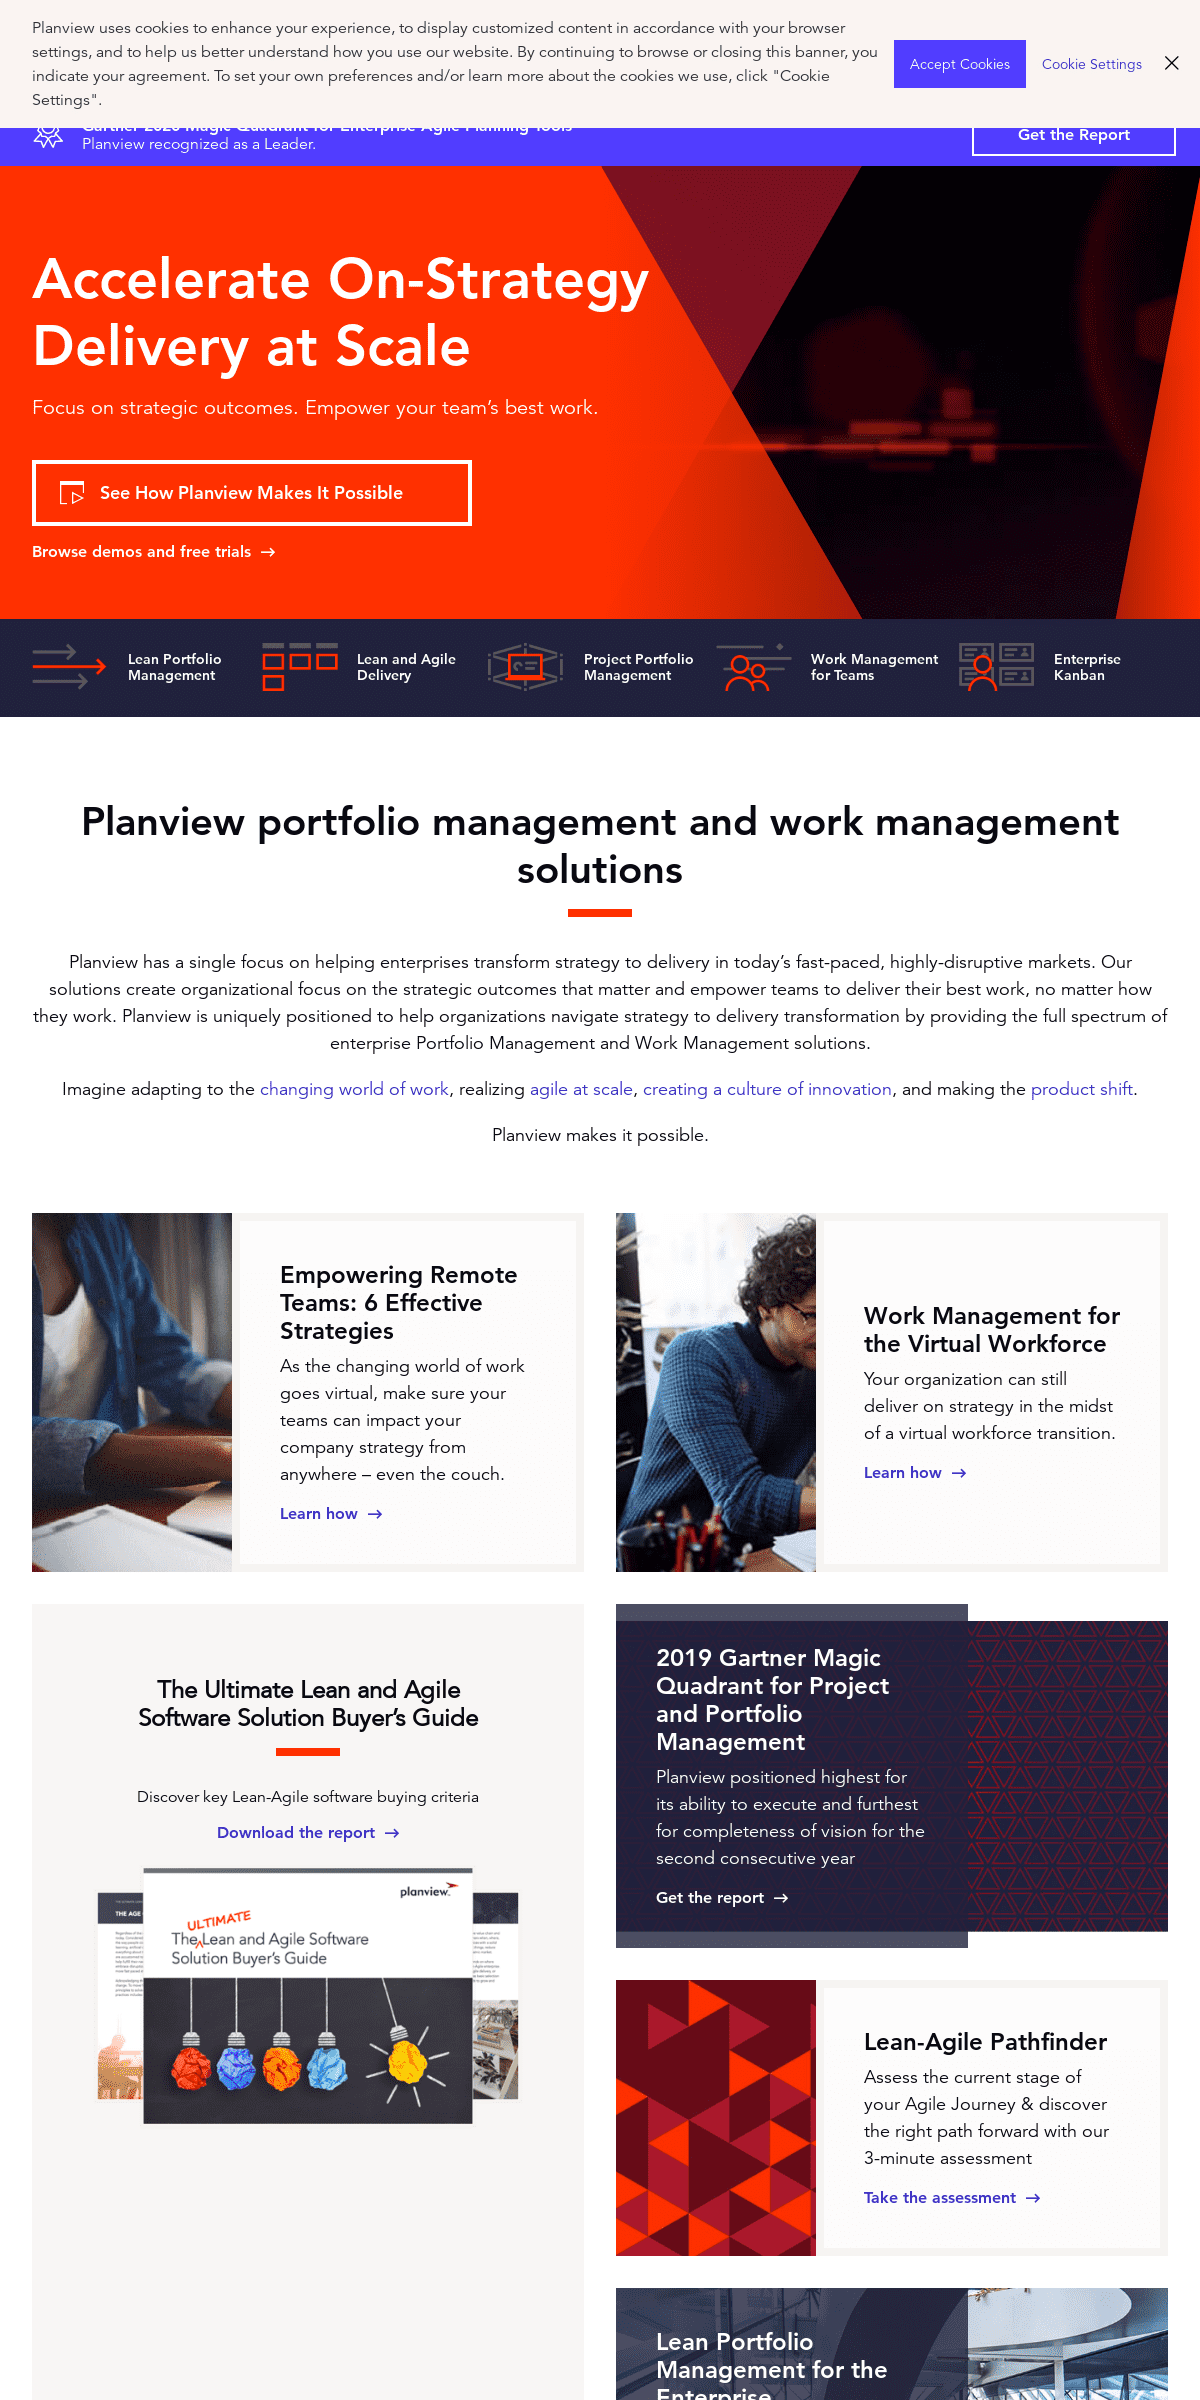 A complete backup of planview.com